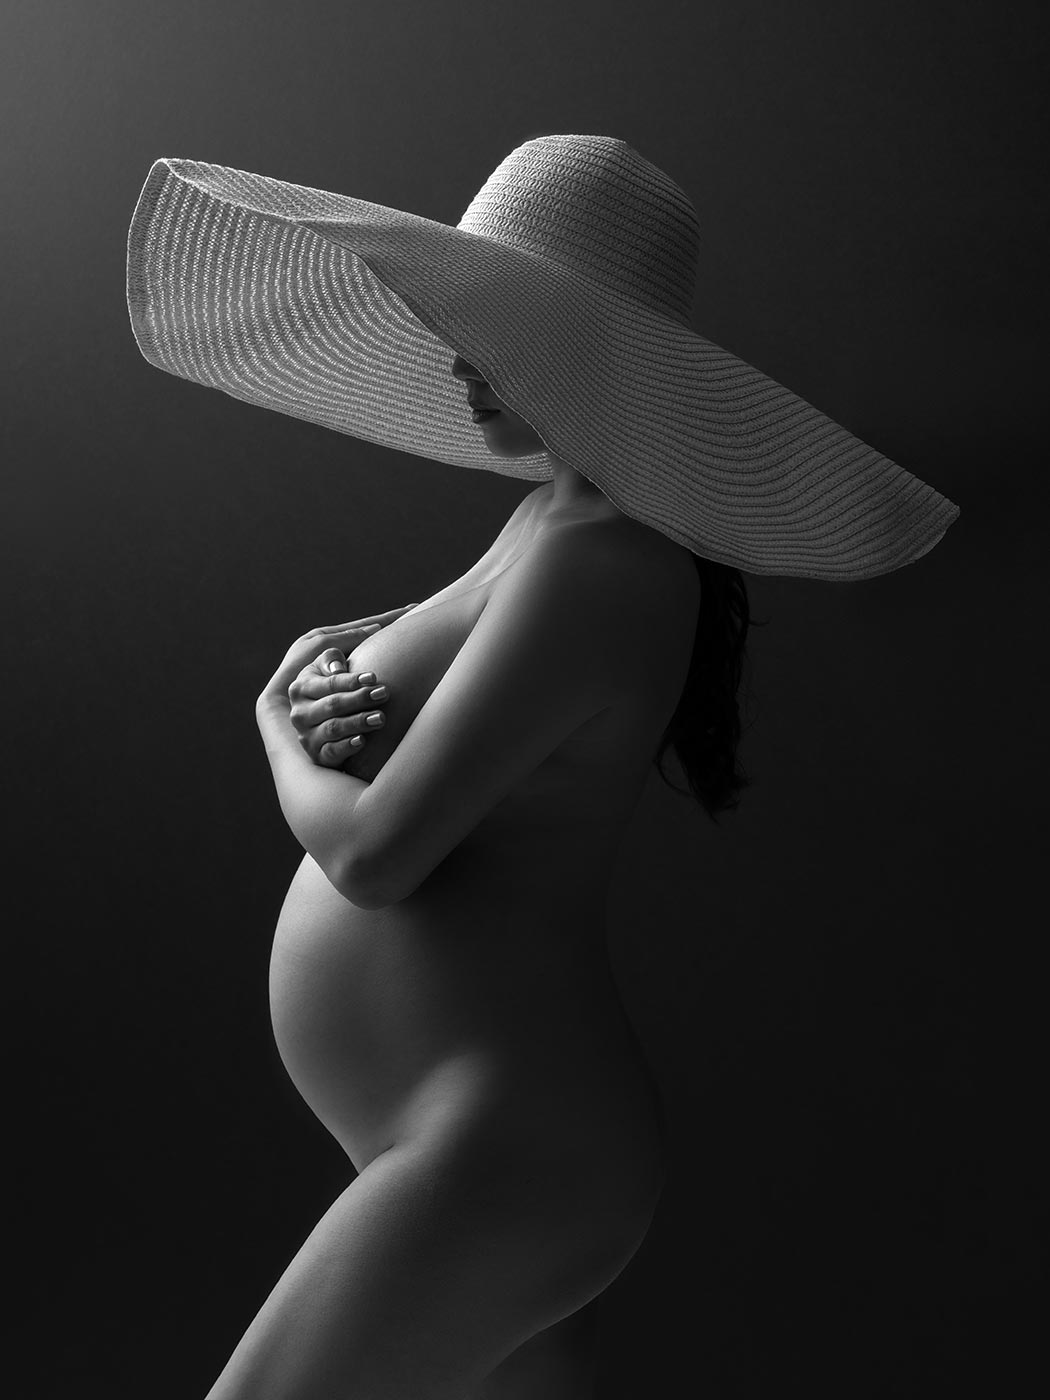 Broad hat worn by a pregnancy model at a photo studio in NYC